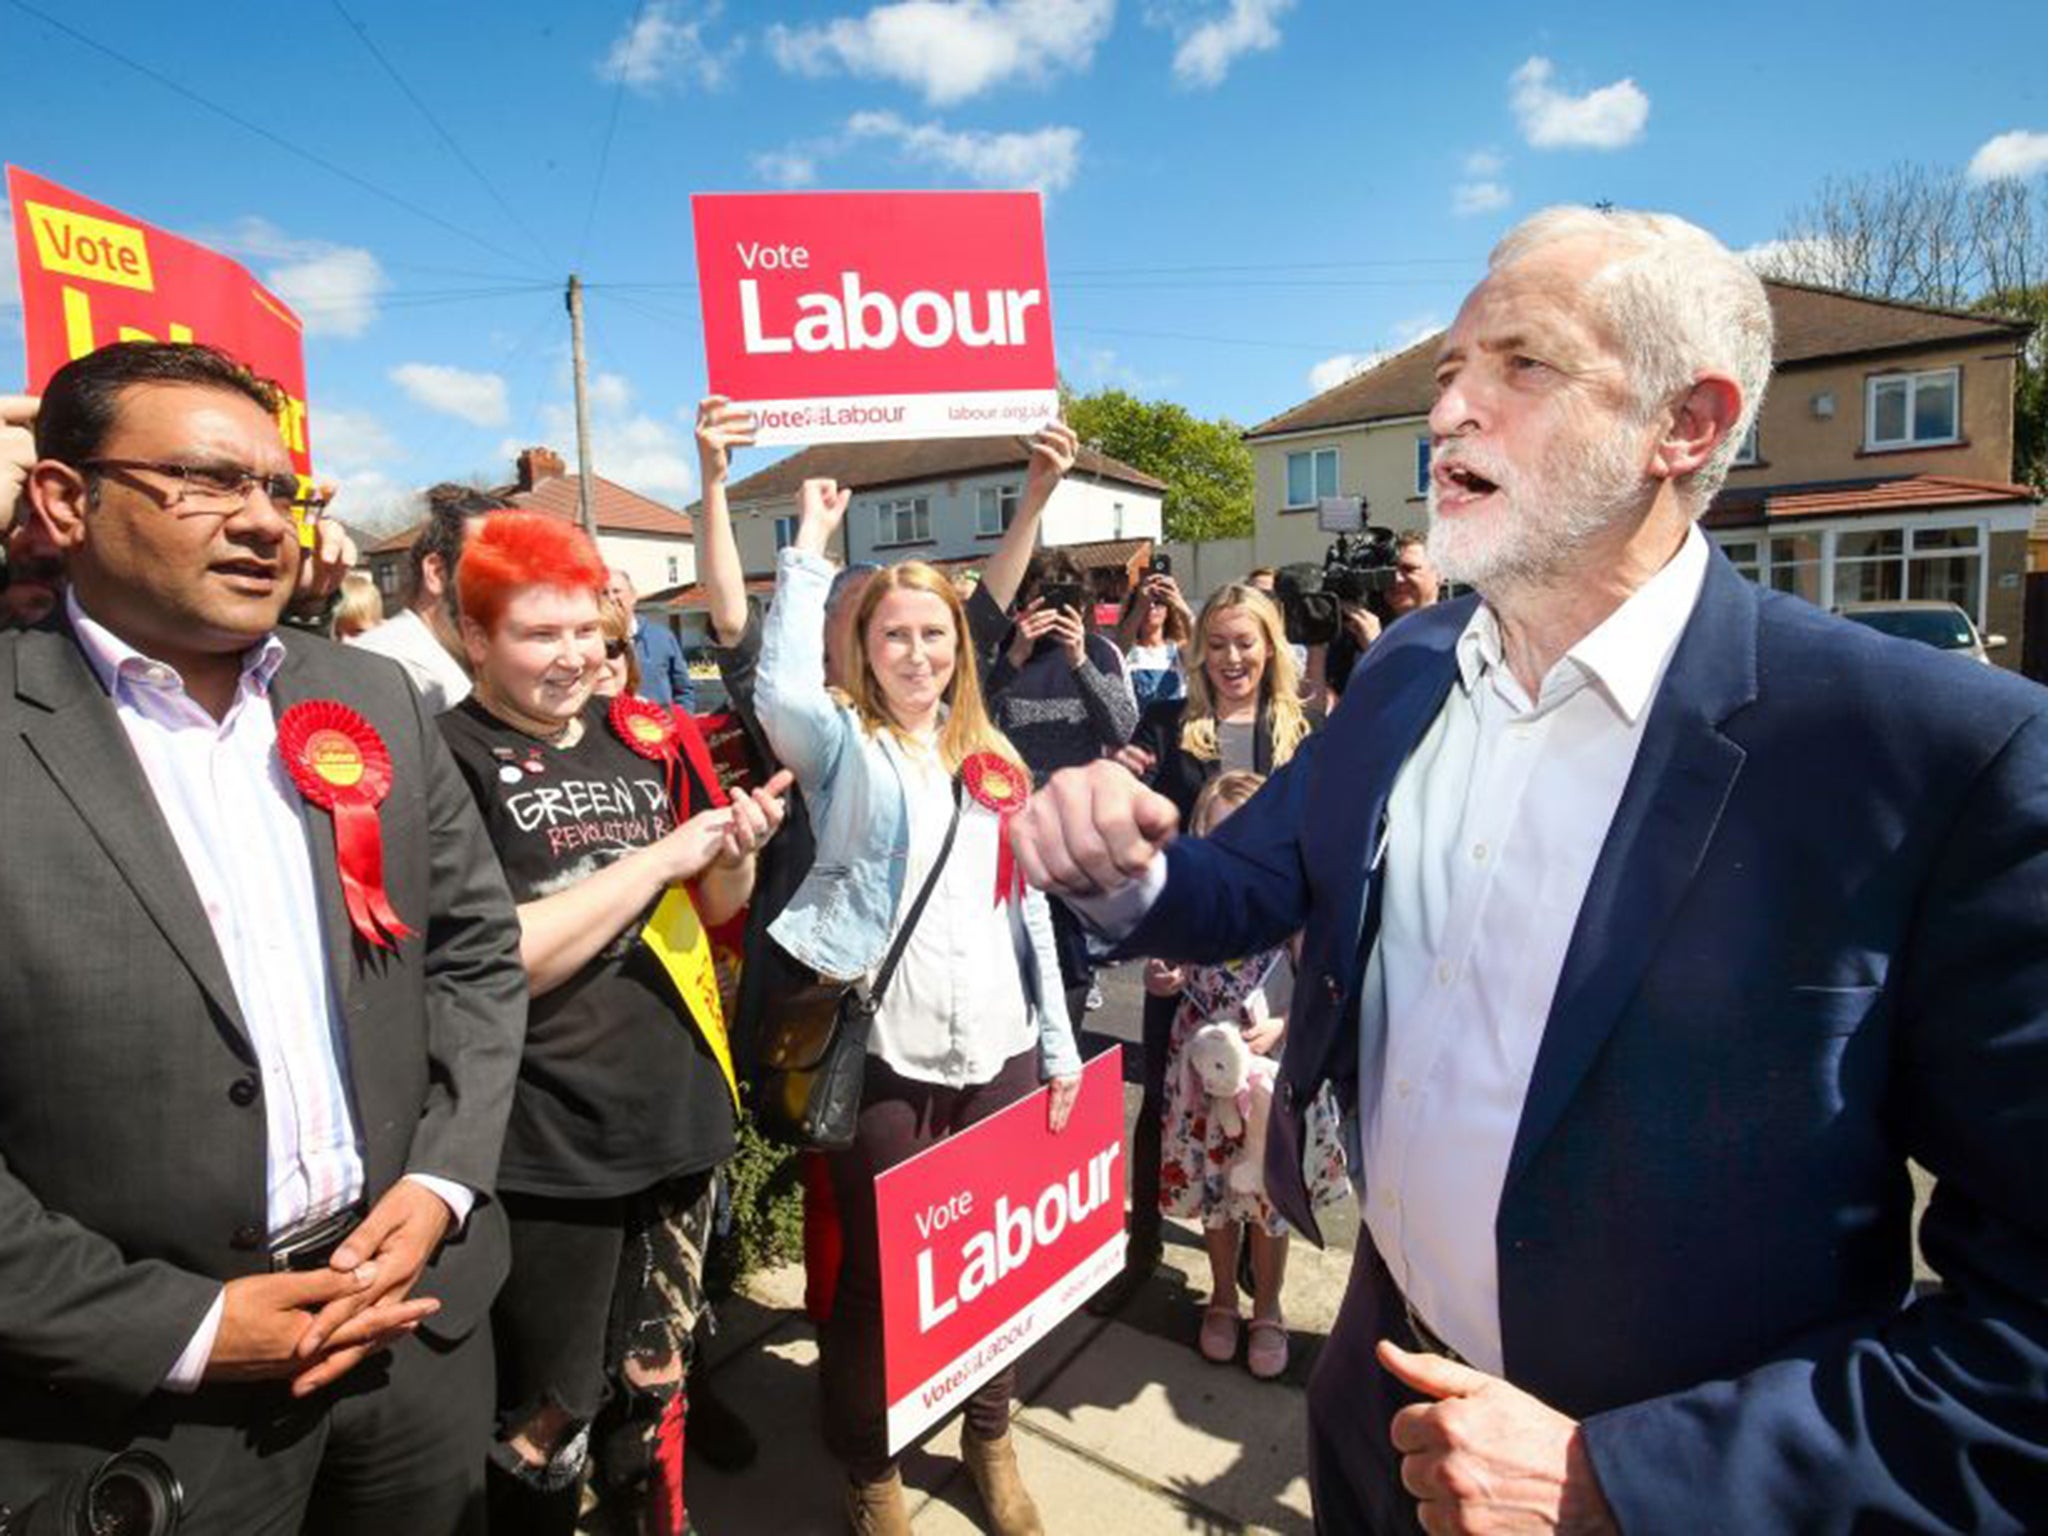 General election 2017: Jeremy Corbyn&apos;s constituency visits &apos;increased Labour turnout at polls&apos;, study suggests